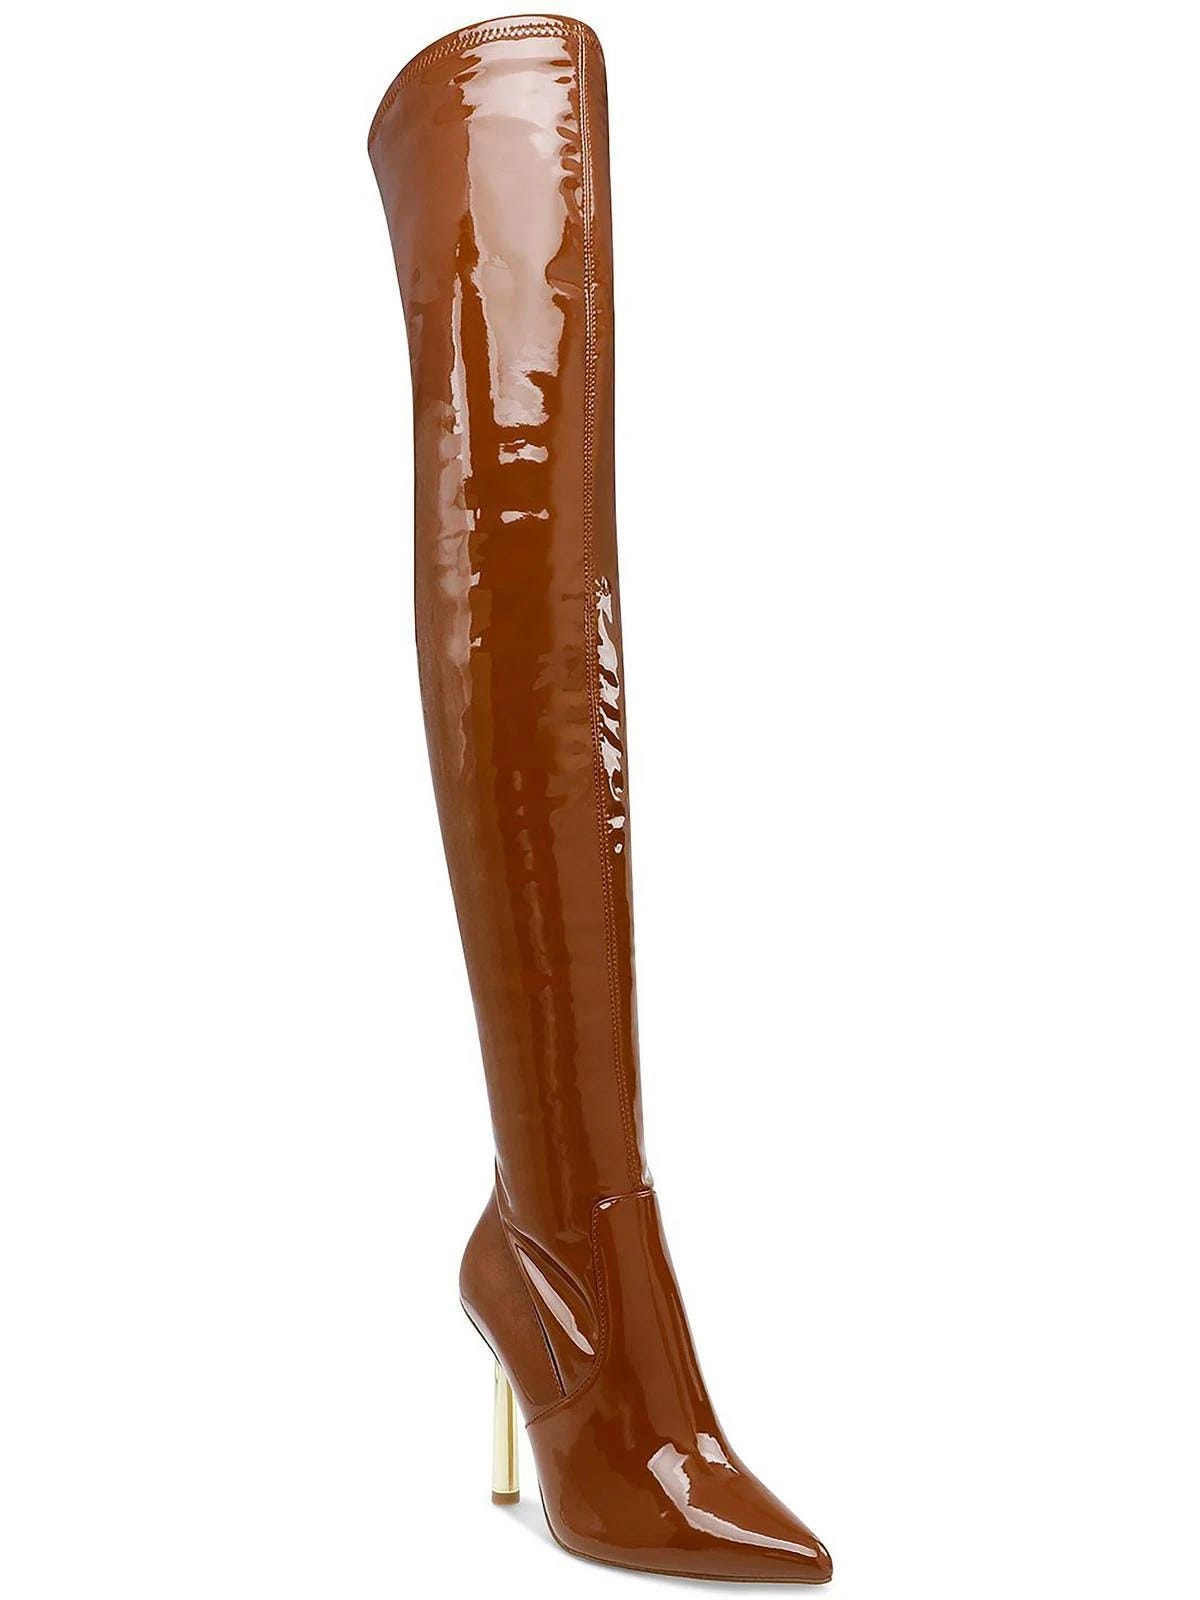 Steve Madden Cognac Patent Over-the-Knee Boots | Image